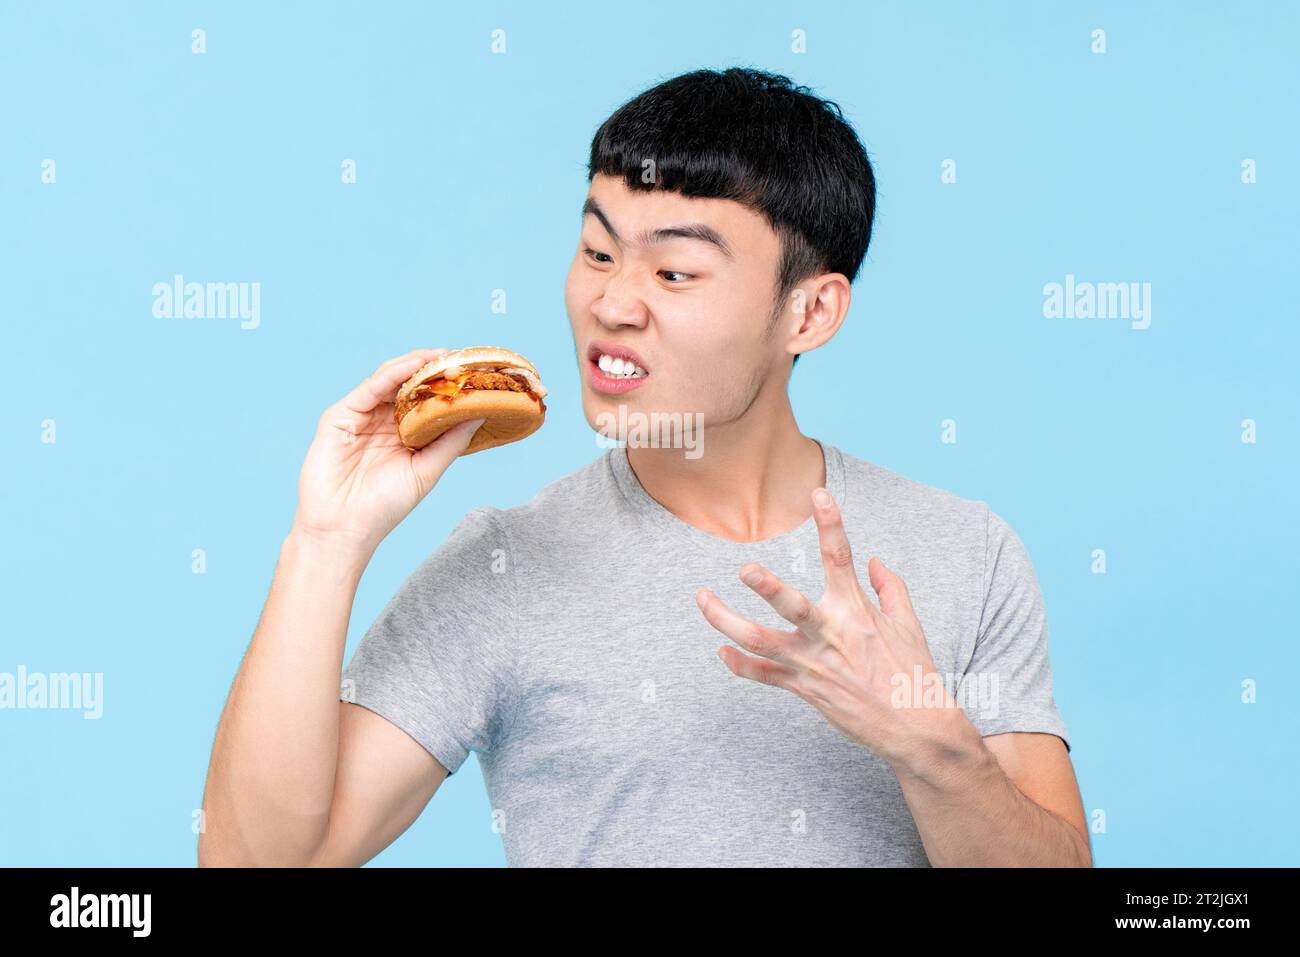 Furious Asian man looking at fresh unhealthy burger while standing on light blue isolated background in studio Stock Photo